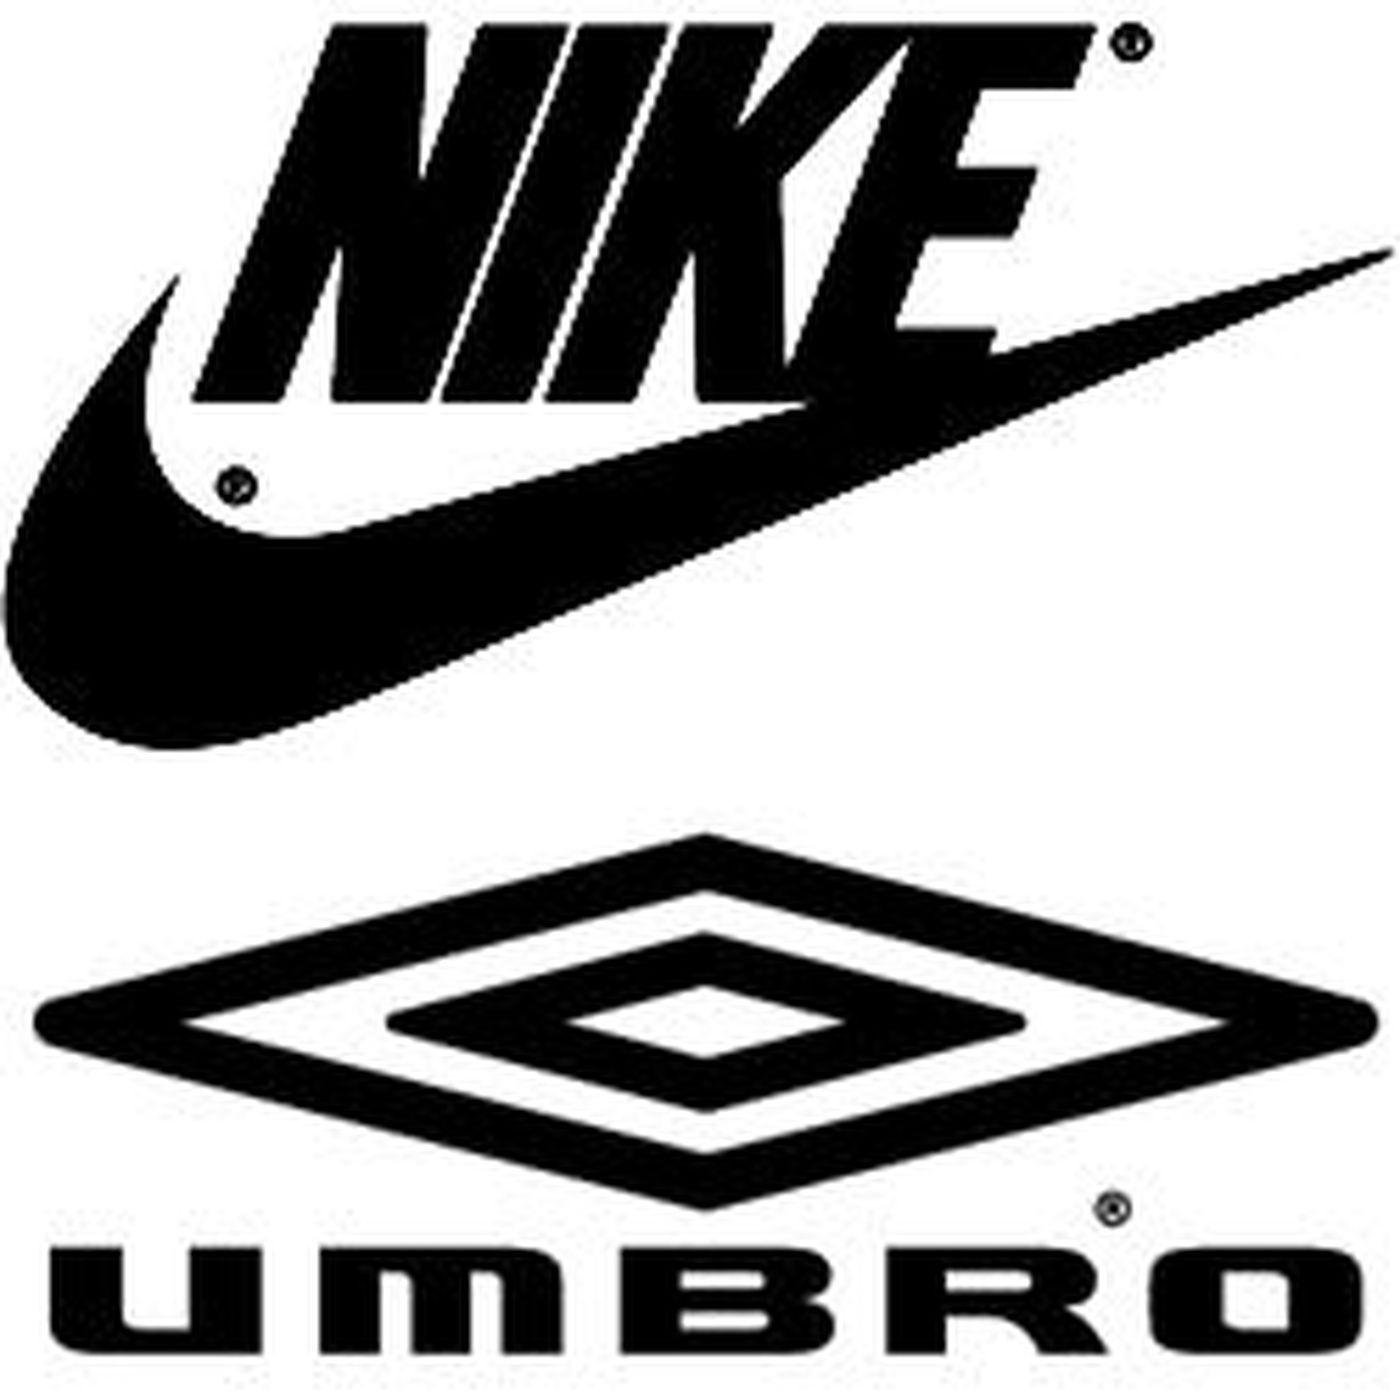 Umbro International Logo - Nike to Acquire British Soccer Supplier Umbro in Attempt to Broaden